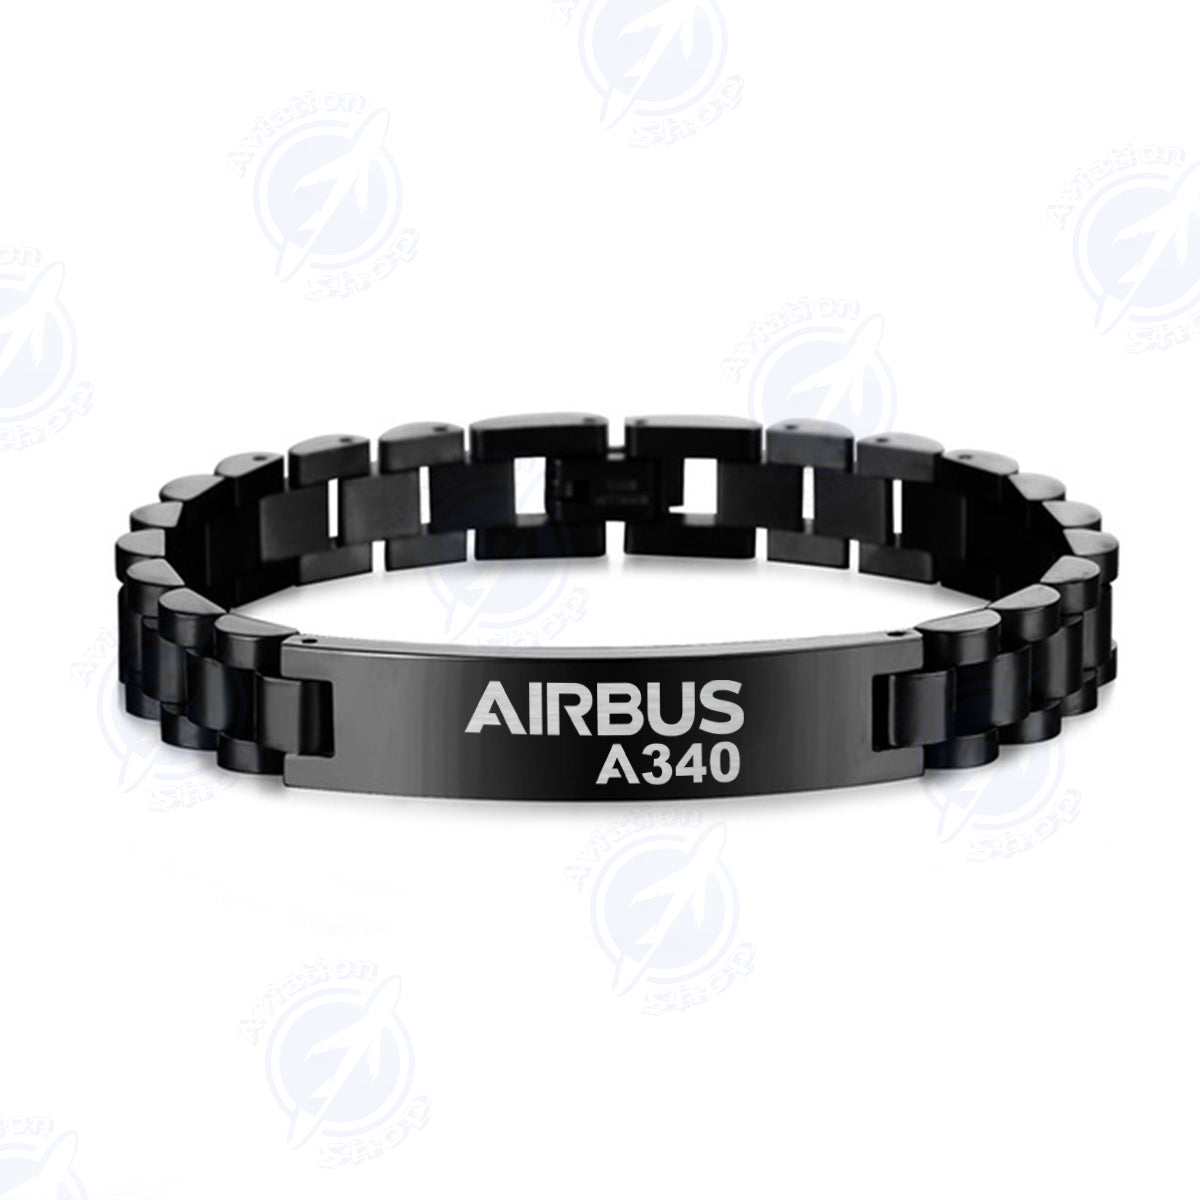 Airbus A340 & Text Designed Stainless Steel Chain Bracelets